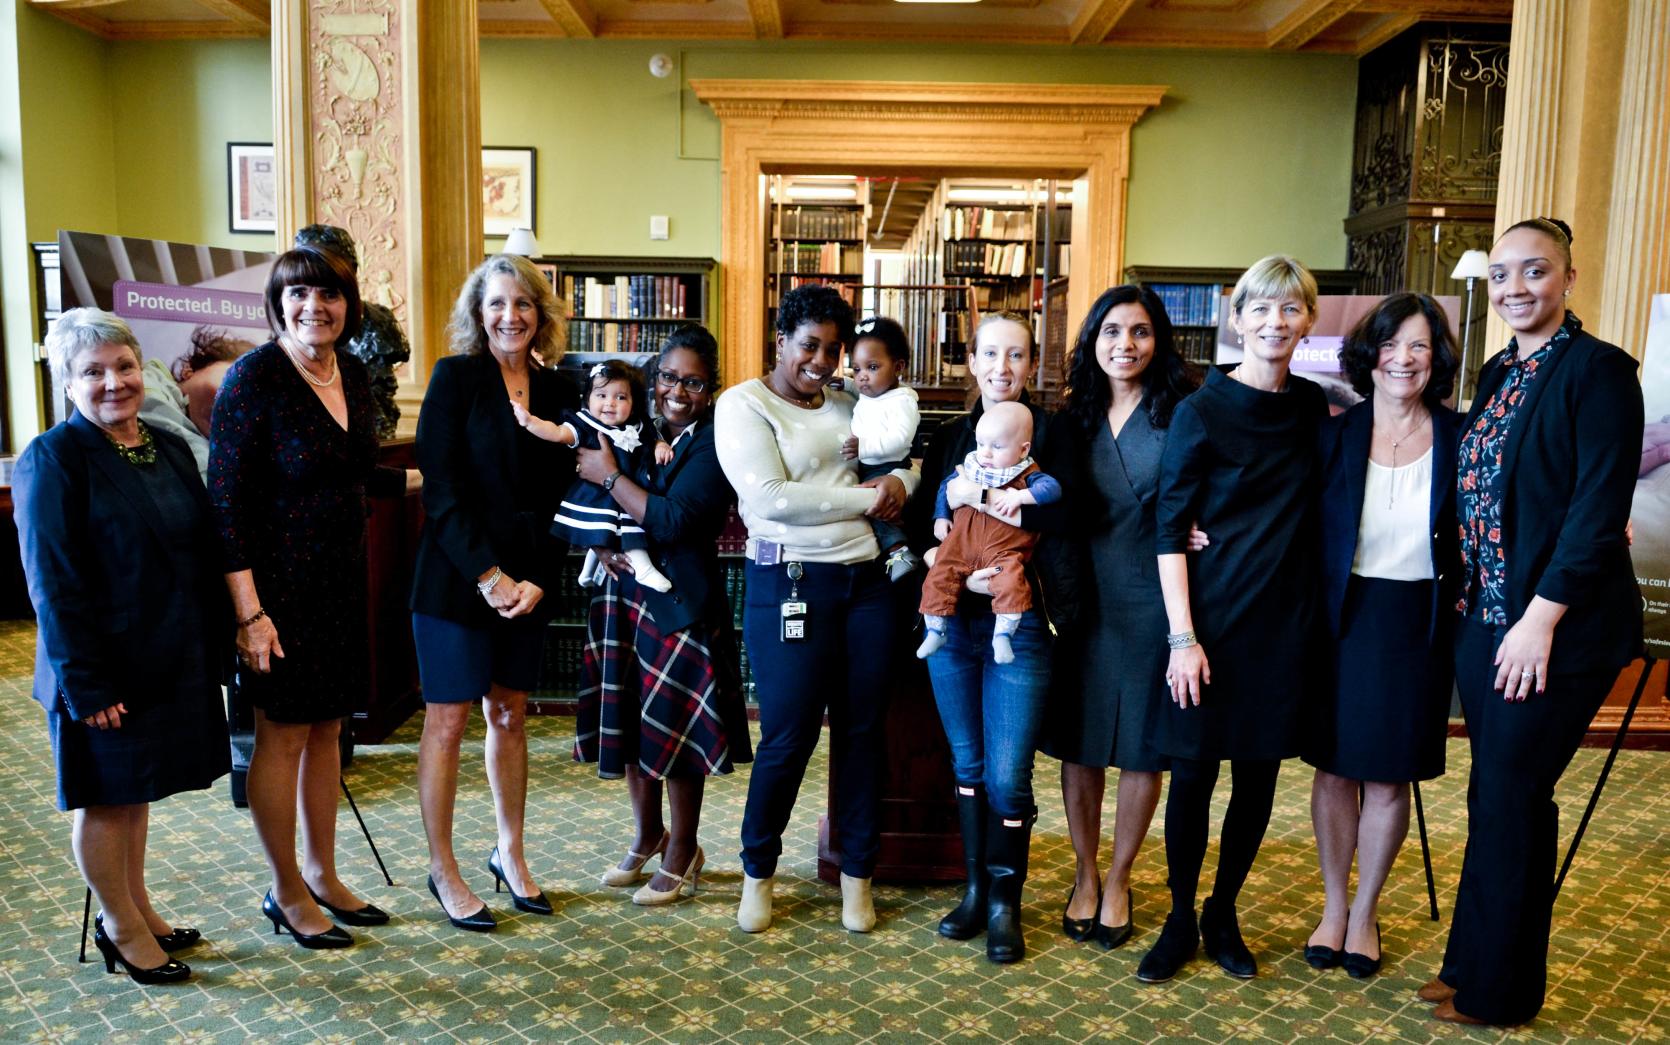 Photo from left to right: Maria Mossaides, Middlesex DA Marian Ryan, First Lady Lauren Baker, Sanouri (parent) and Avalyn (child), Shameakia (parent) and Cheyenne (child), Meg (parent) and Oscar (child), DCF Medical Director Dr. Linda Sagor and Doris Decoo (photo by Lucyus Fevrier)